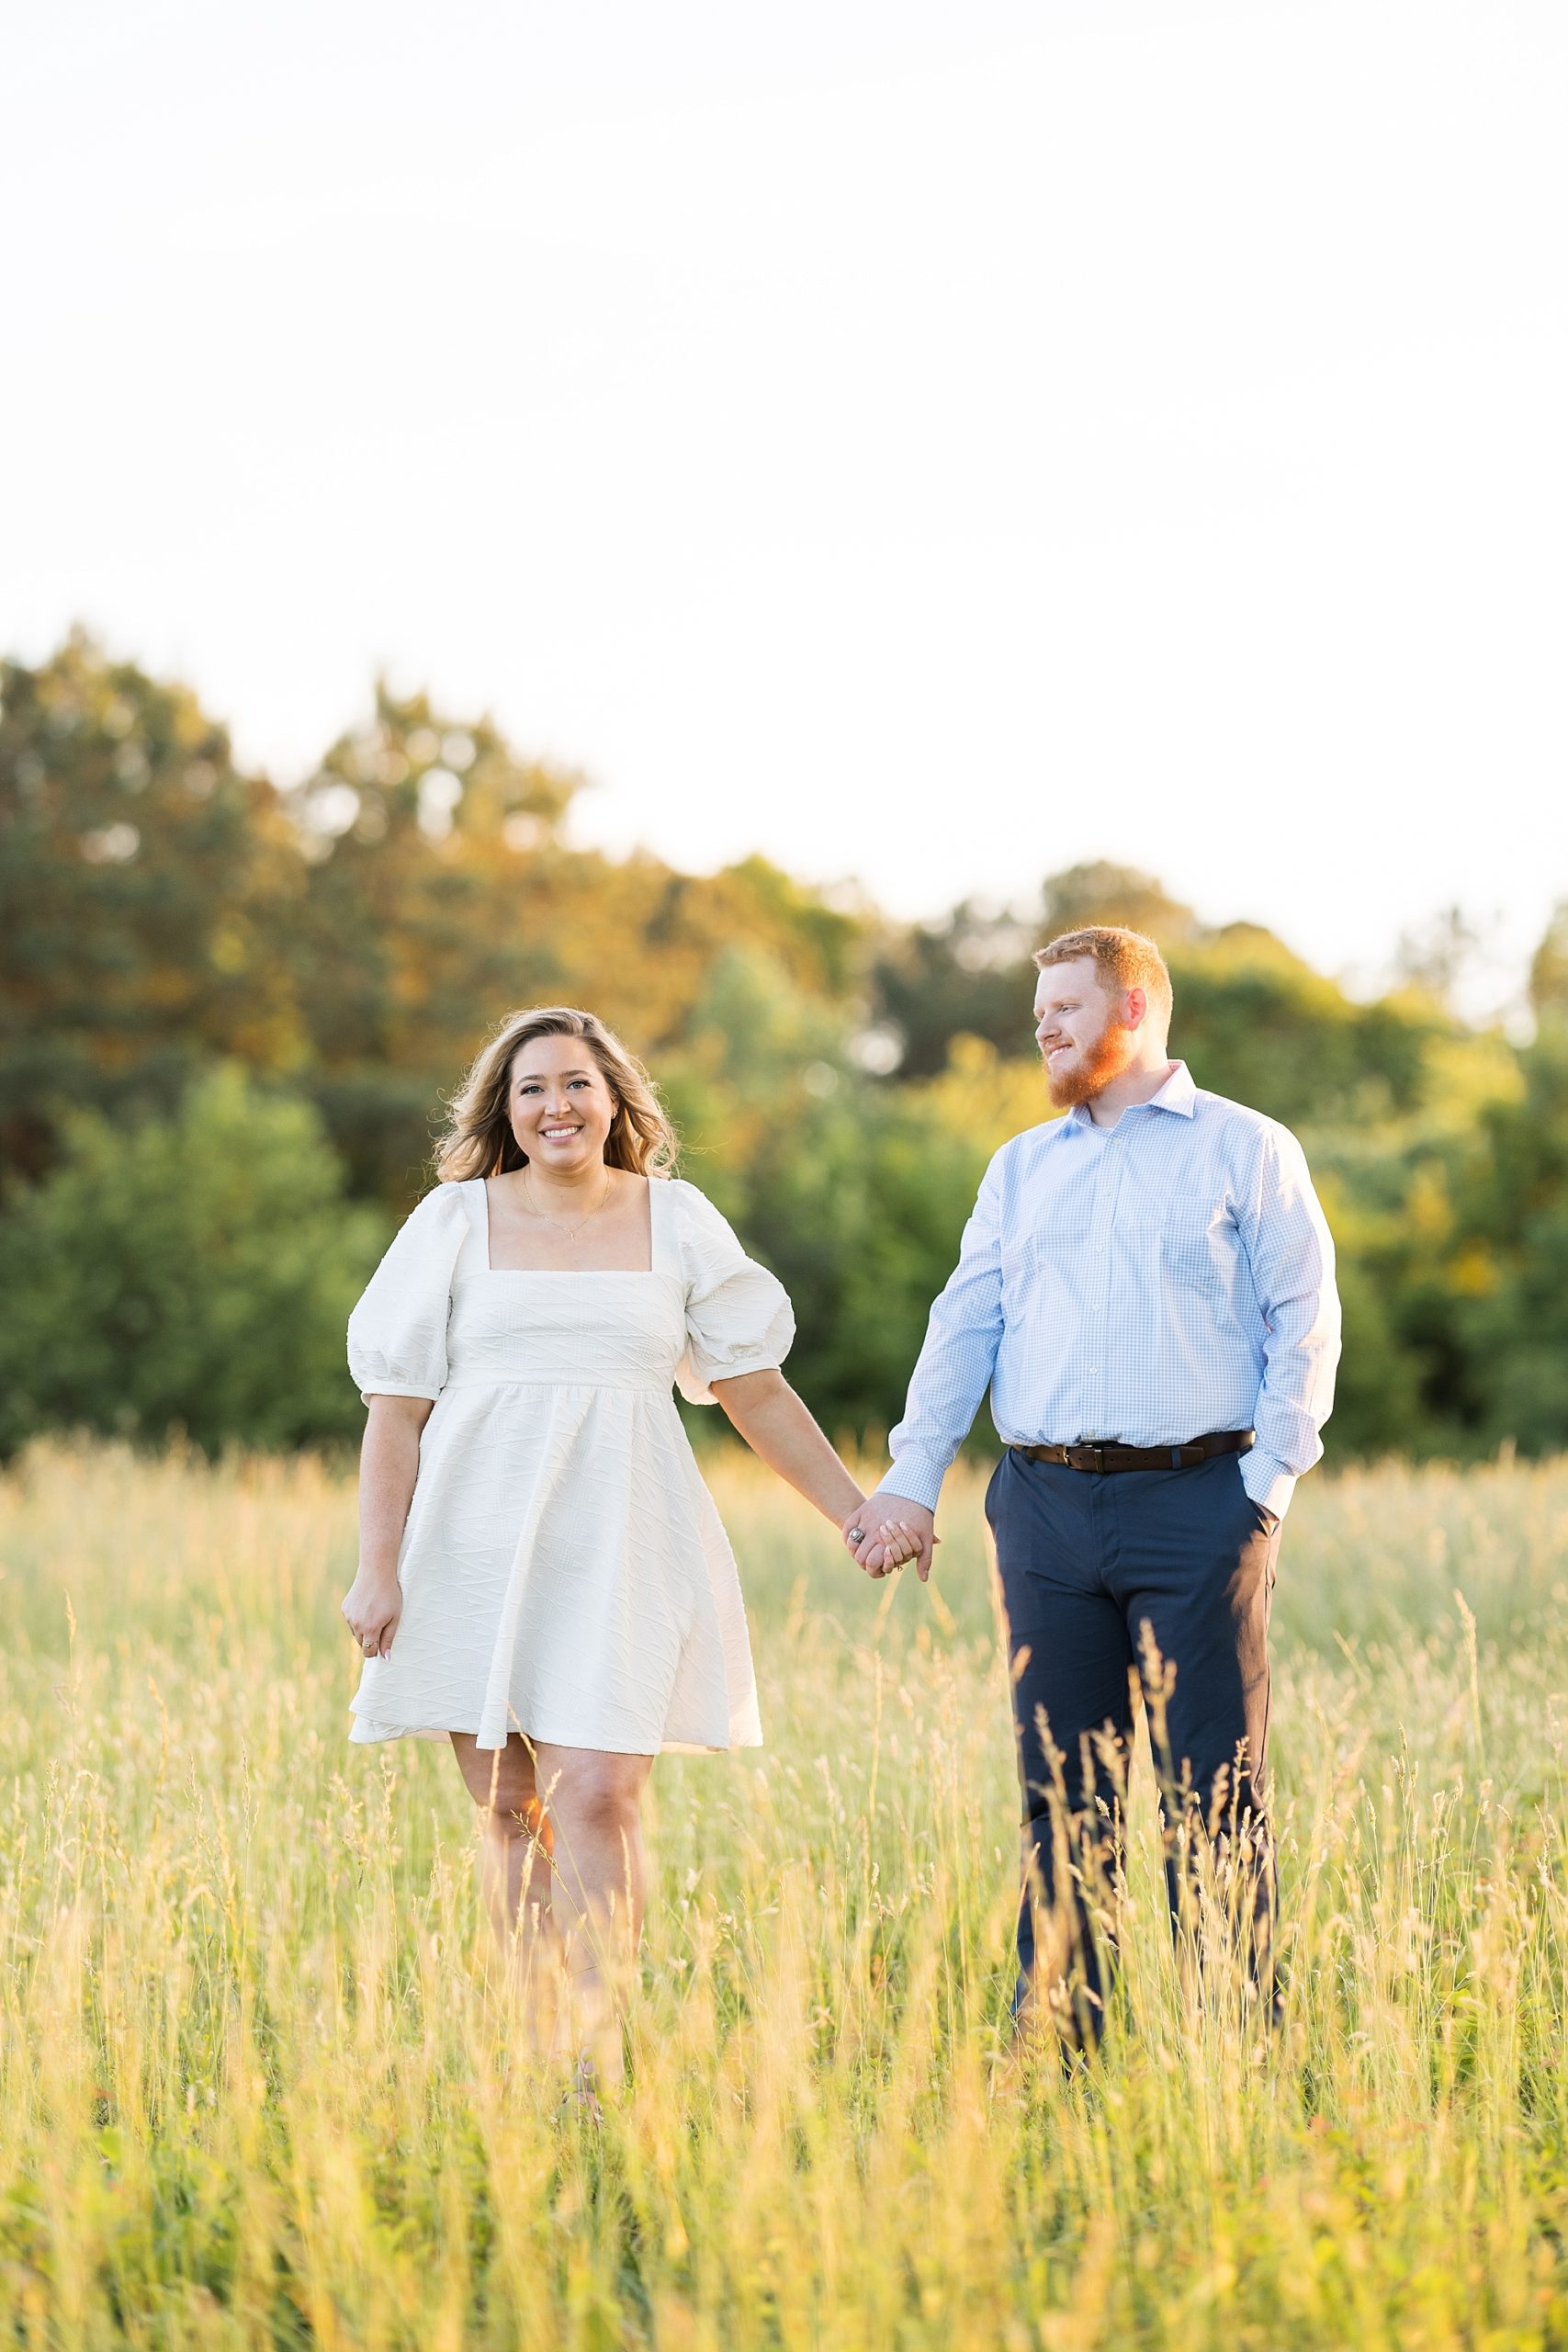 Engagement photos in Raleigh | Raleigh NC Engagement Photographer